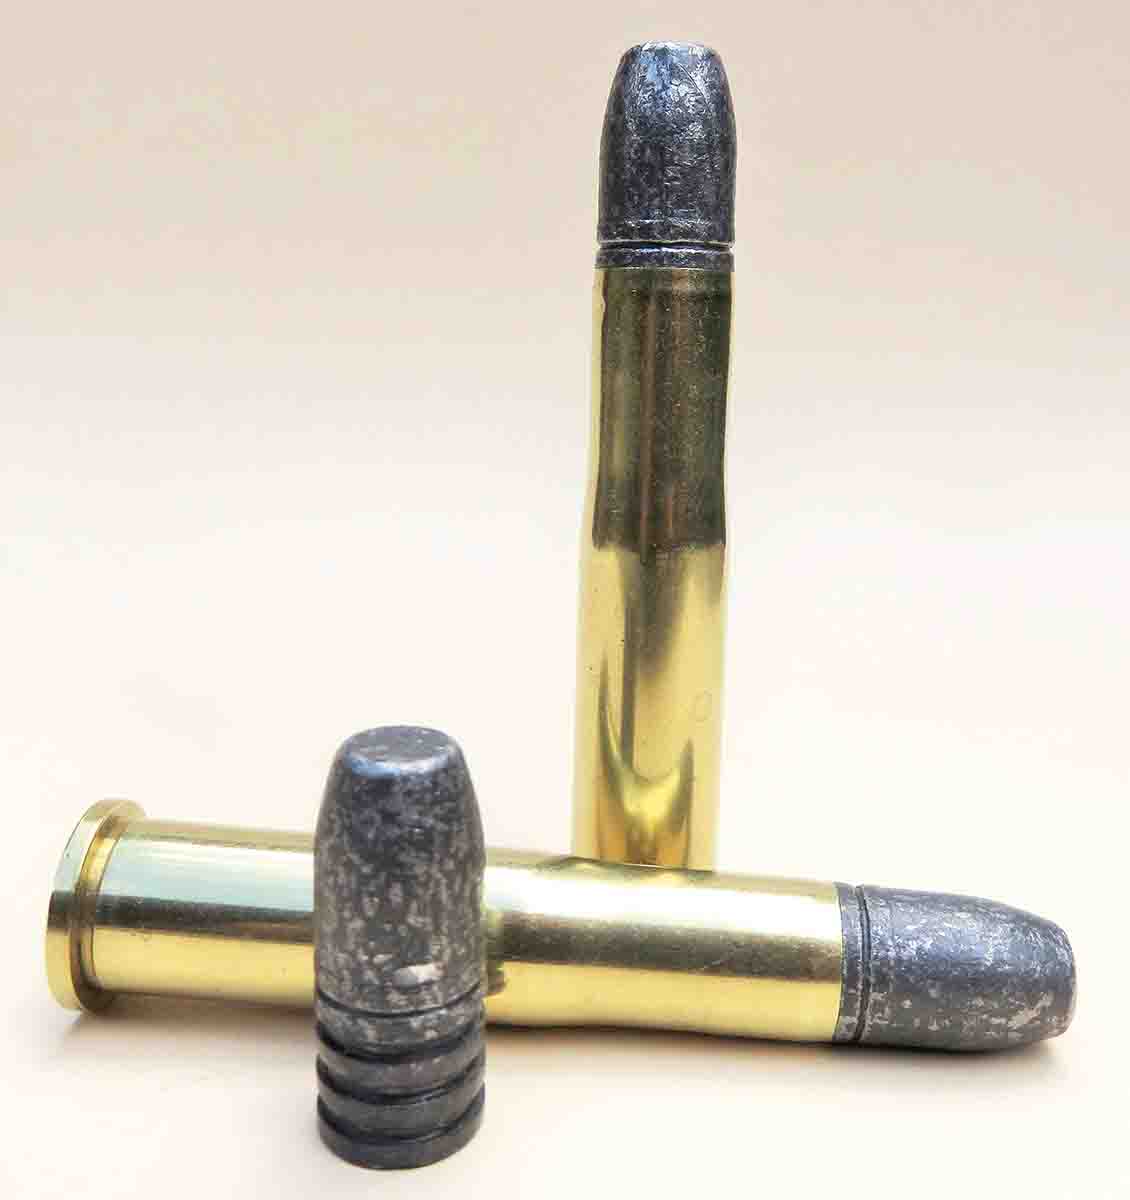 Coated lead bullets are used, weighing just under 400 grains. Meat-in-the-pot accuracy displayed on the first target.